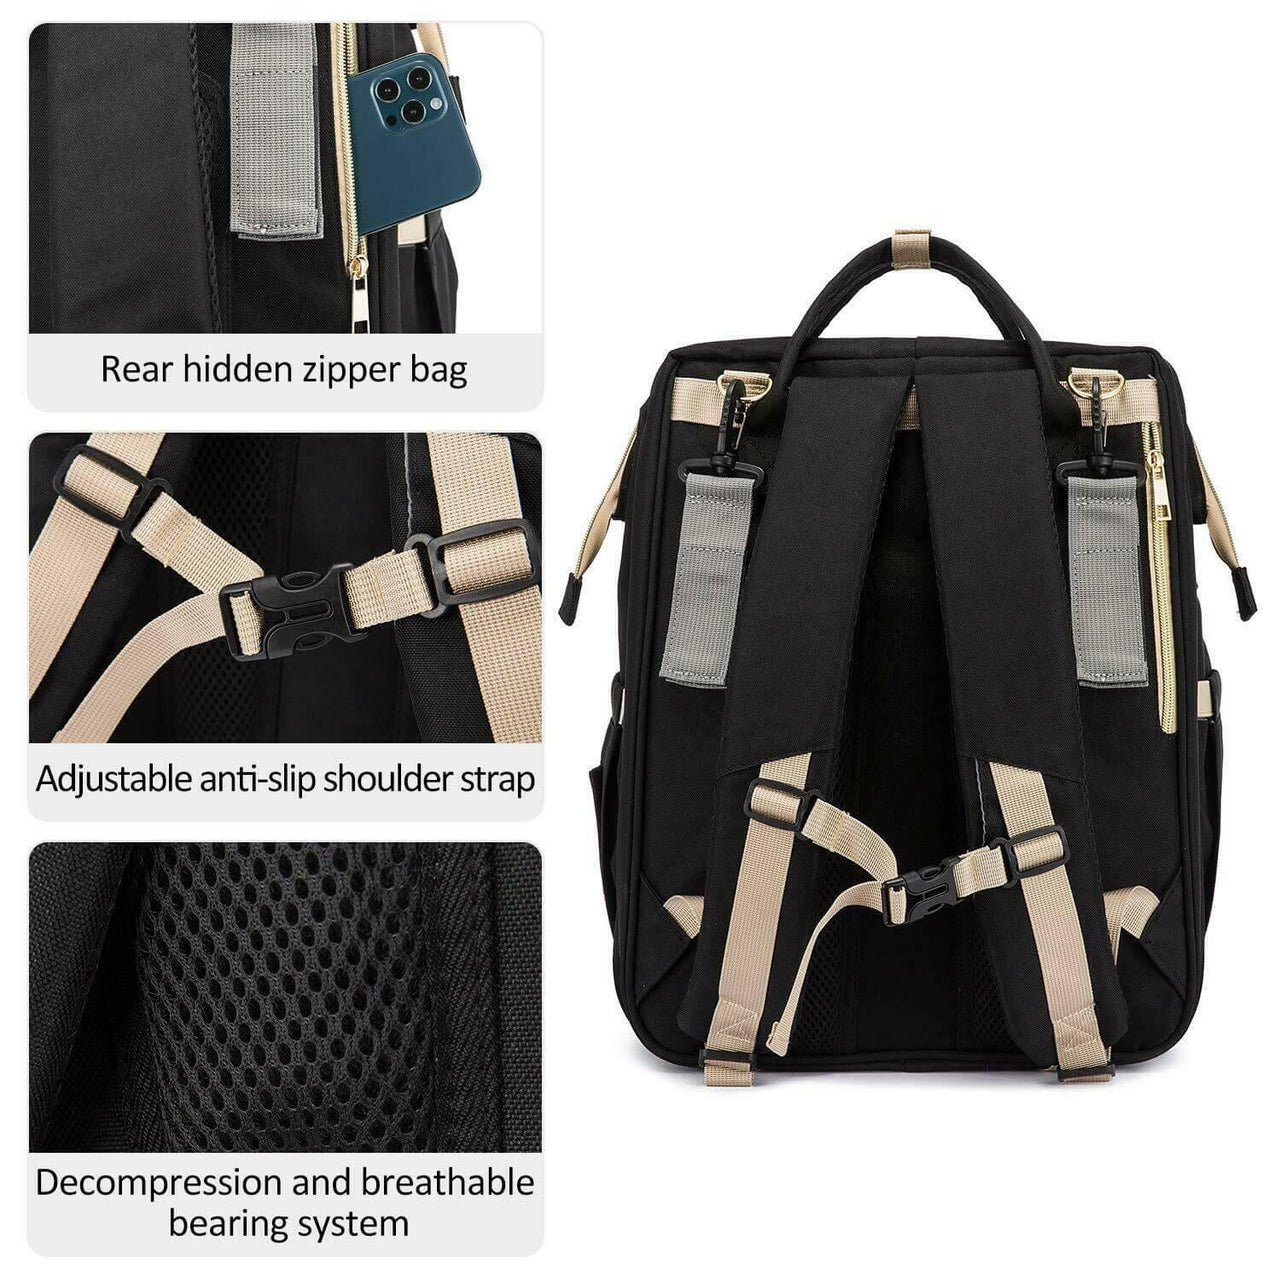 Ultimate Diaper Bag Backpack With Bed Changing Station